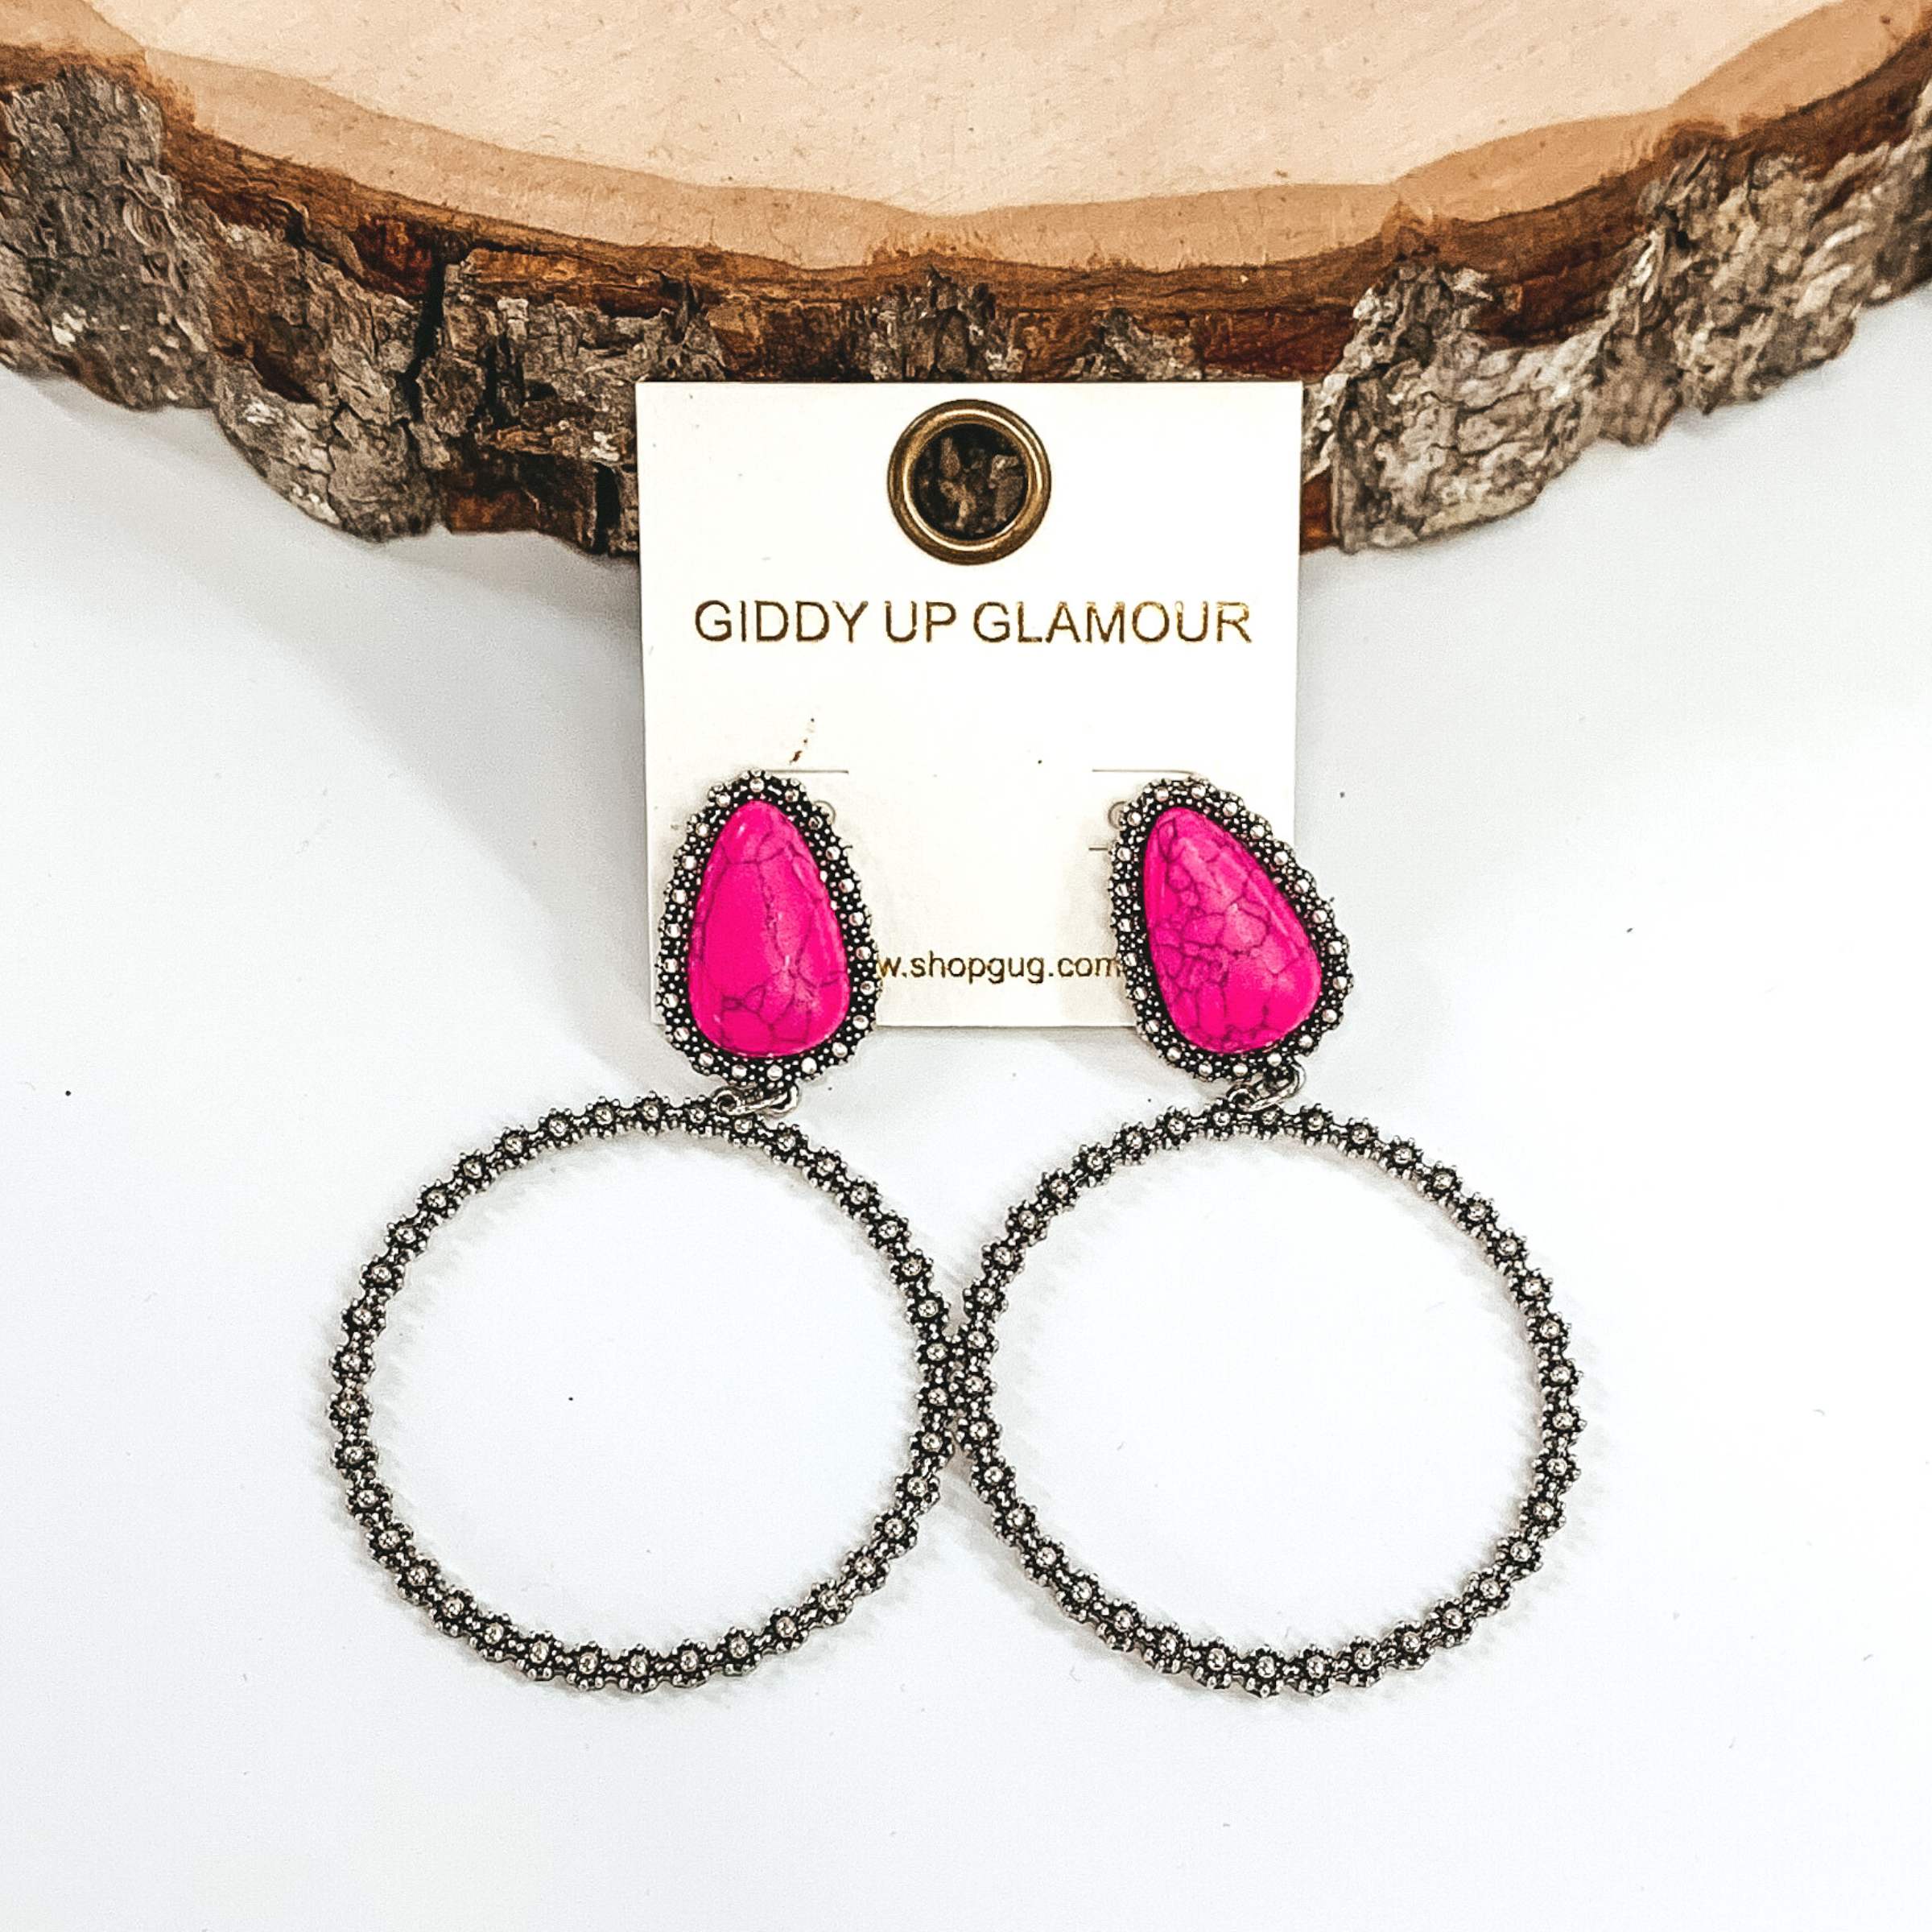 These earrings have pink teardrop stone studs outlined in silver. At the bottom of the stones there is a hanging silver circle. These earrings are pictured on a white background laying against a piece of wood. 